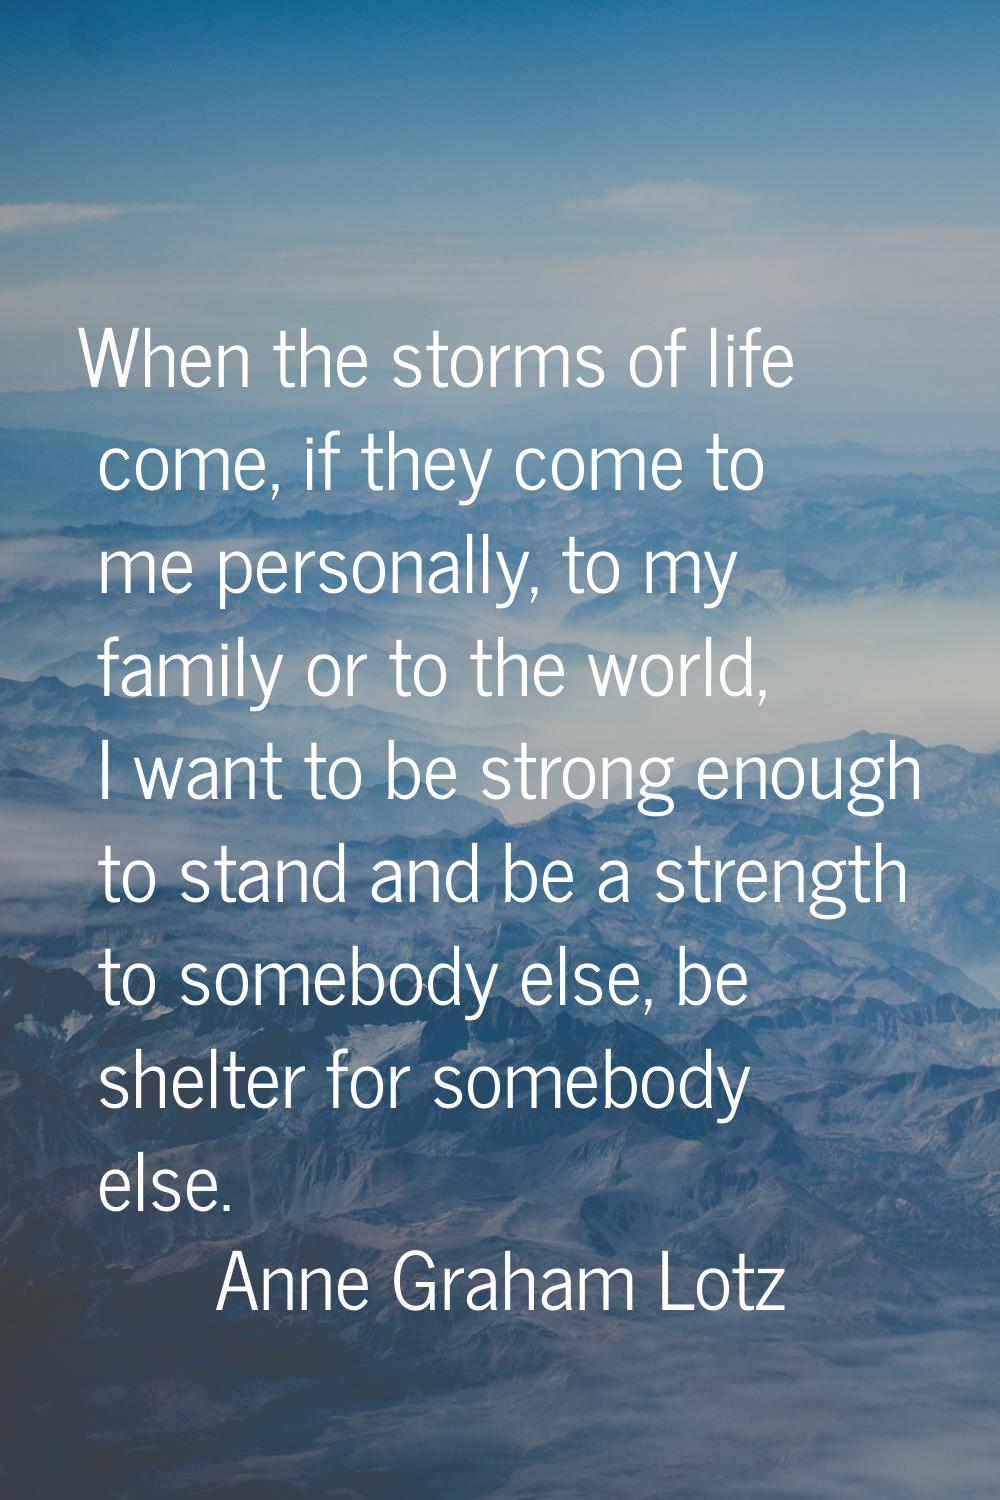 When the storms of life come, if they come to me personally, to my family or to the world, I want t